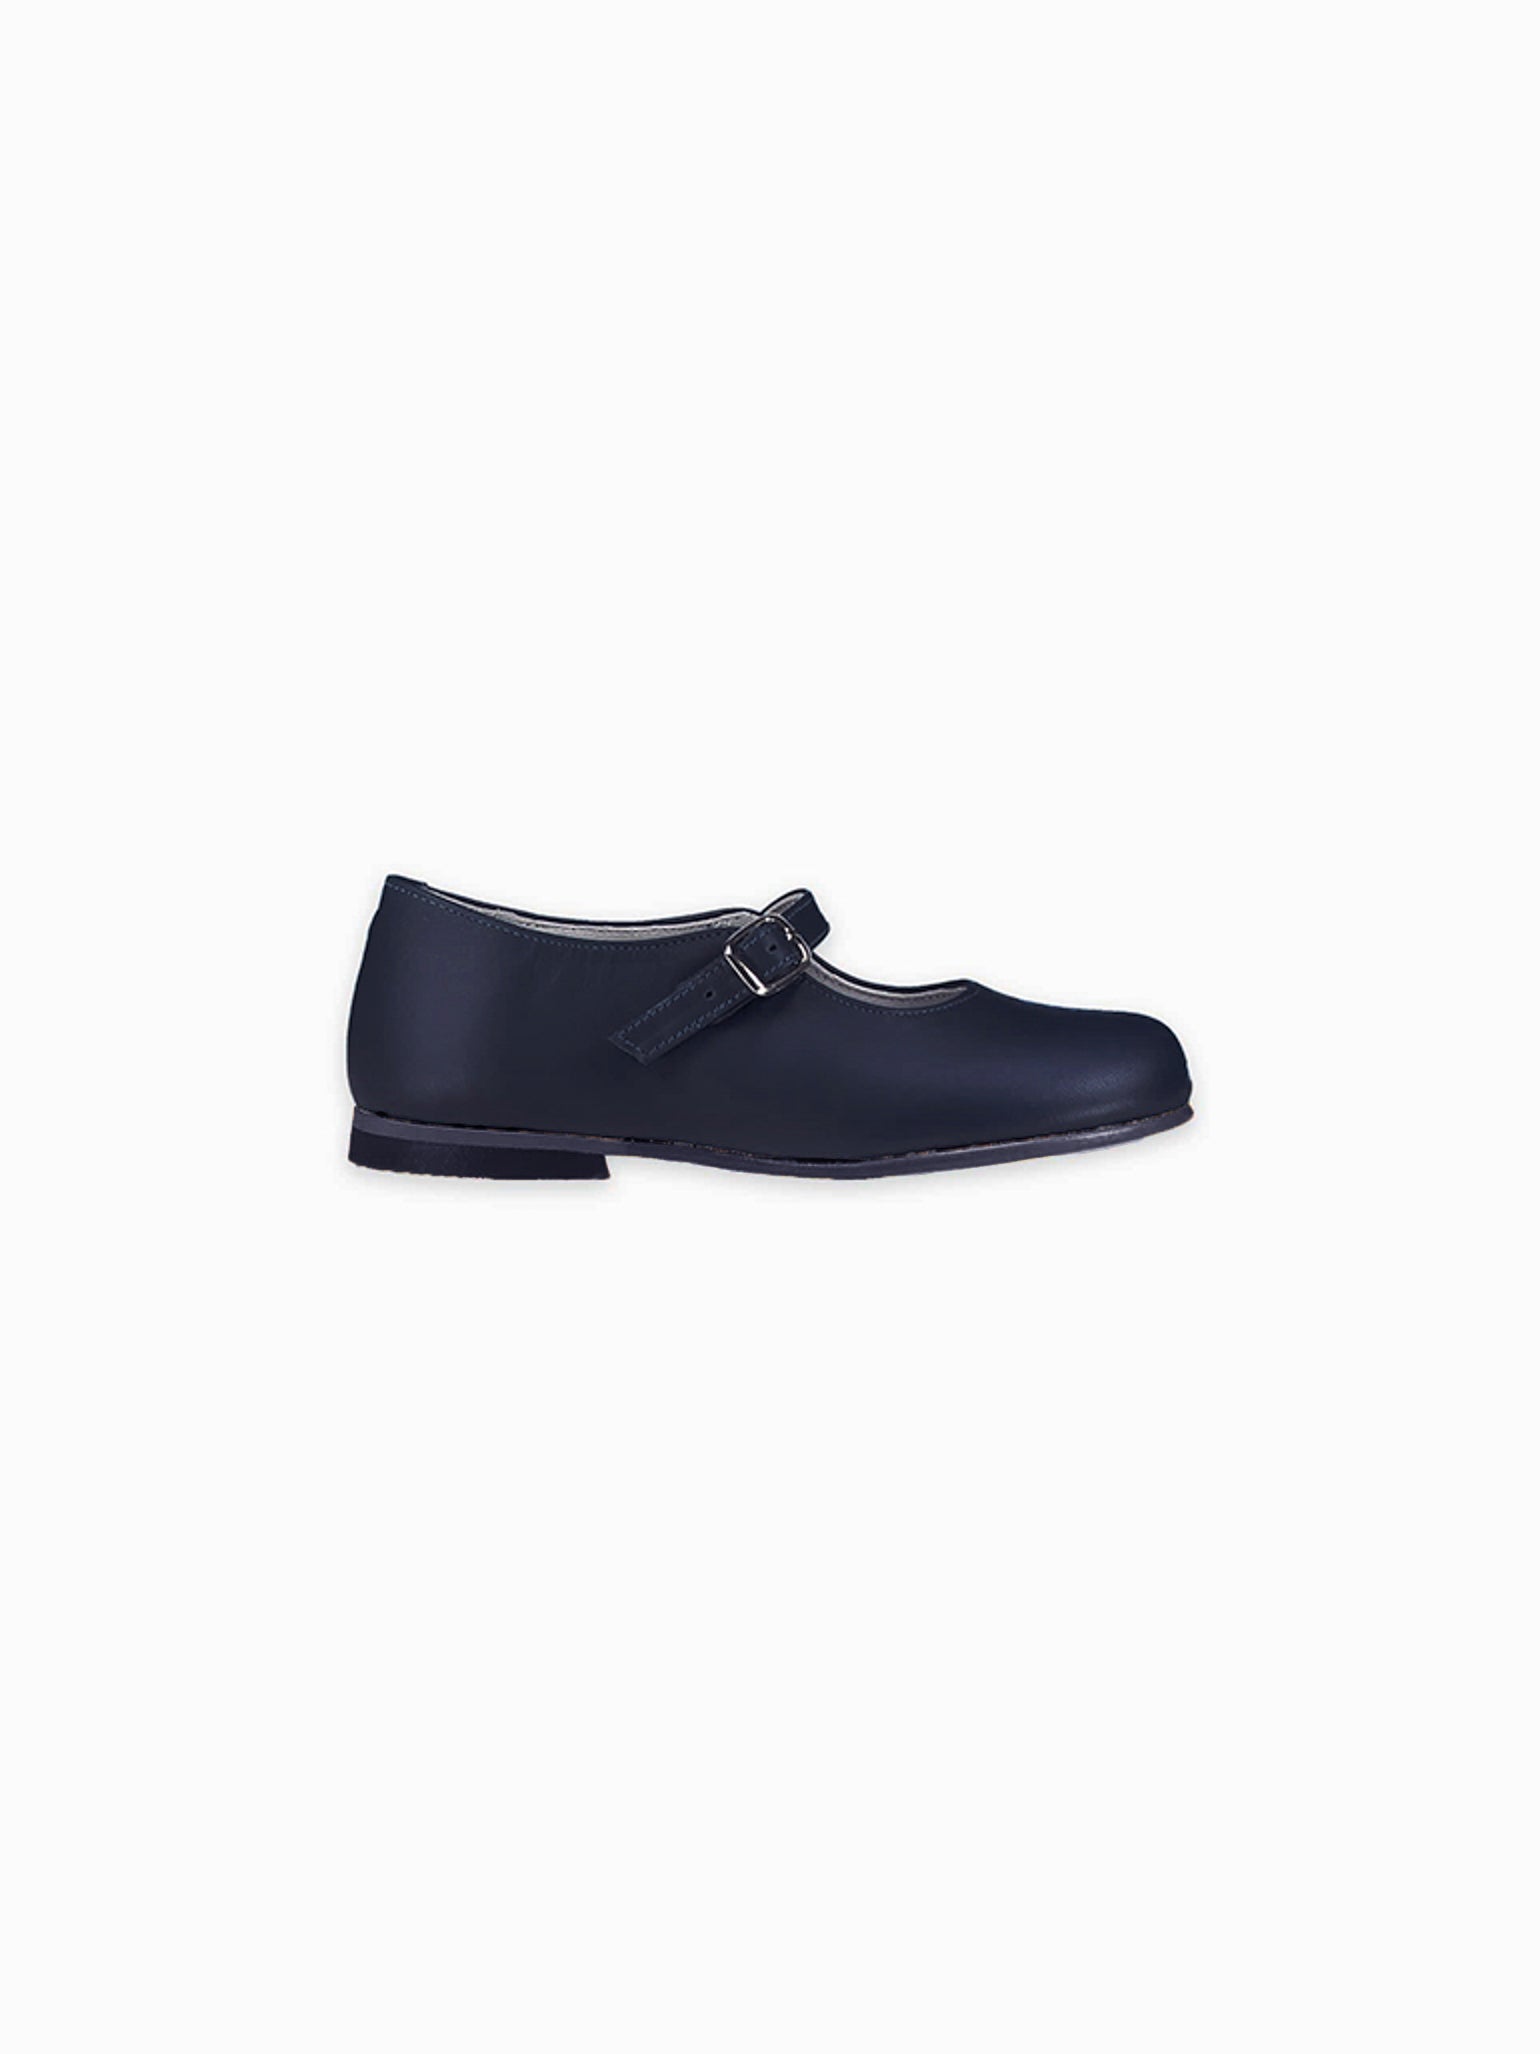 Navy Leather Girl Mary Jane Shoes